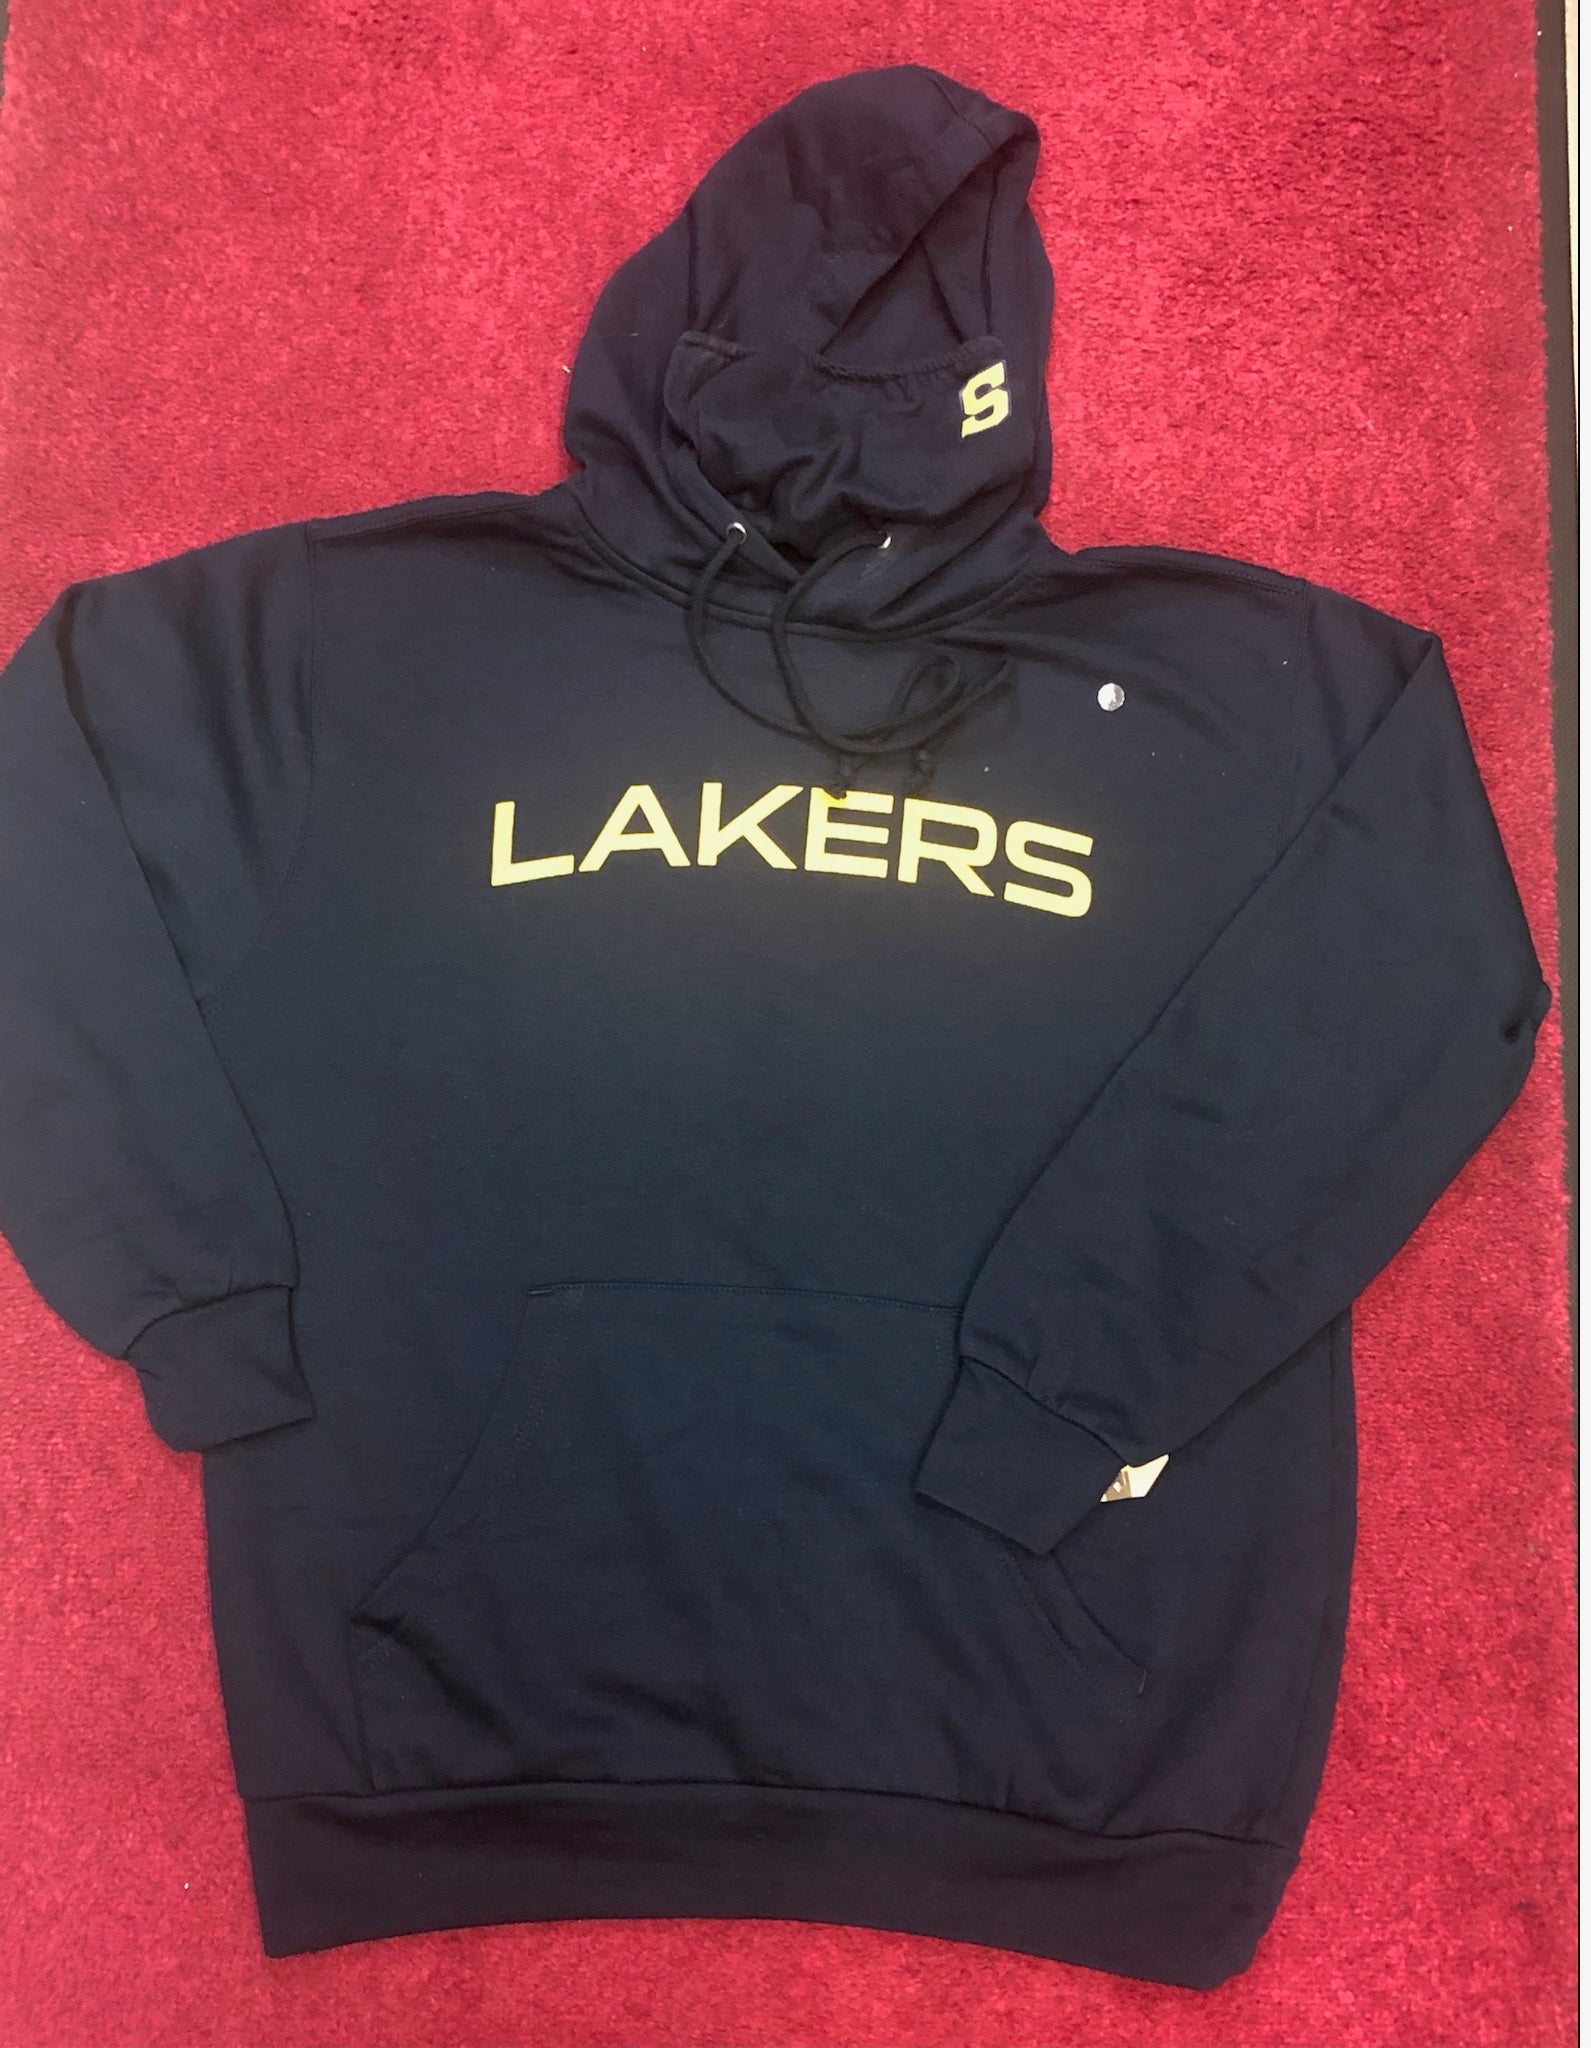 Lakers Pullover Hooded Sweatshirt w/Built in Mask